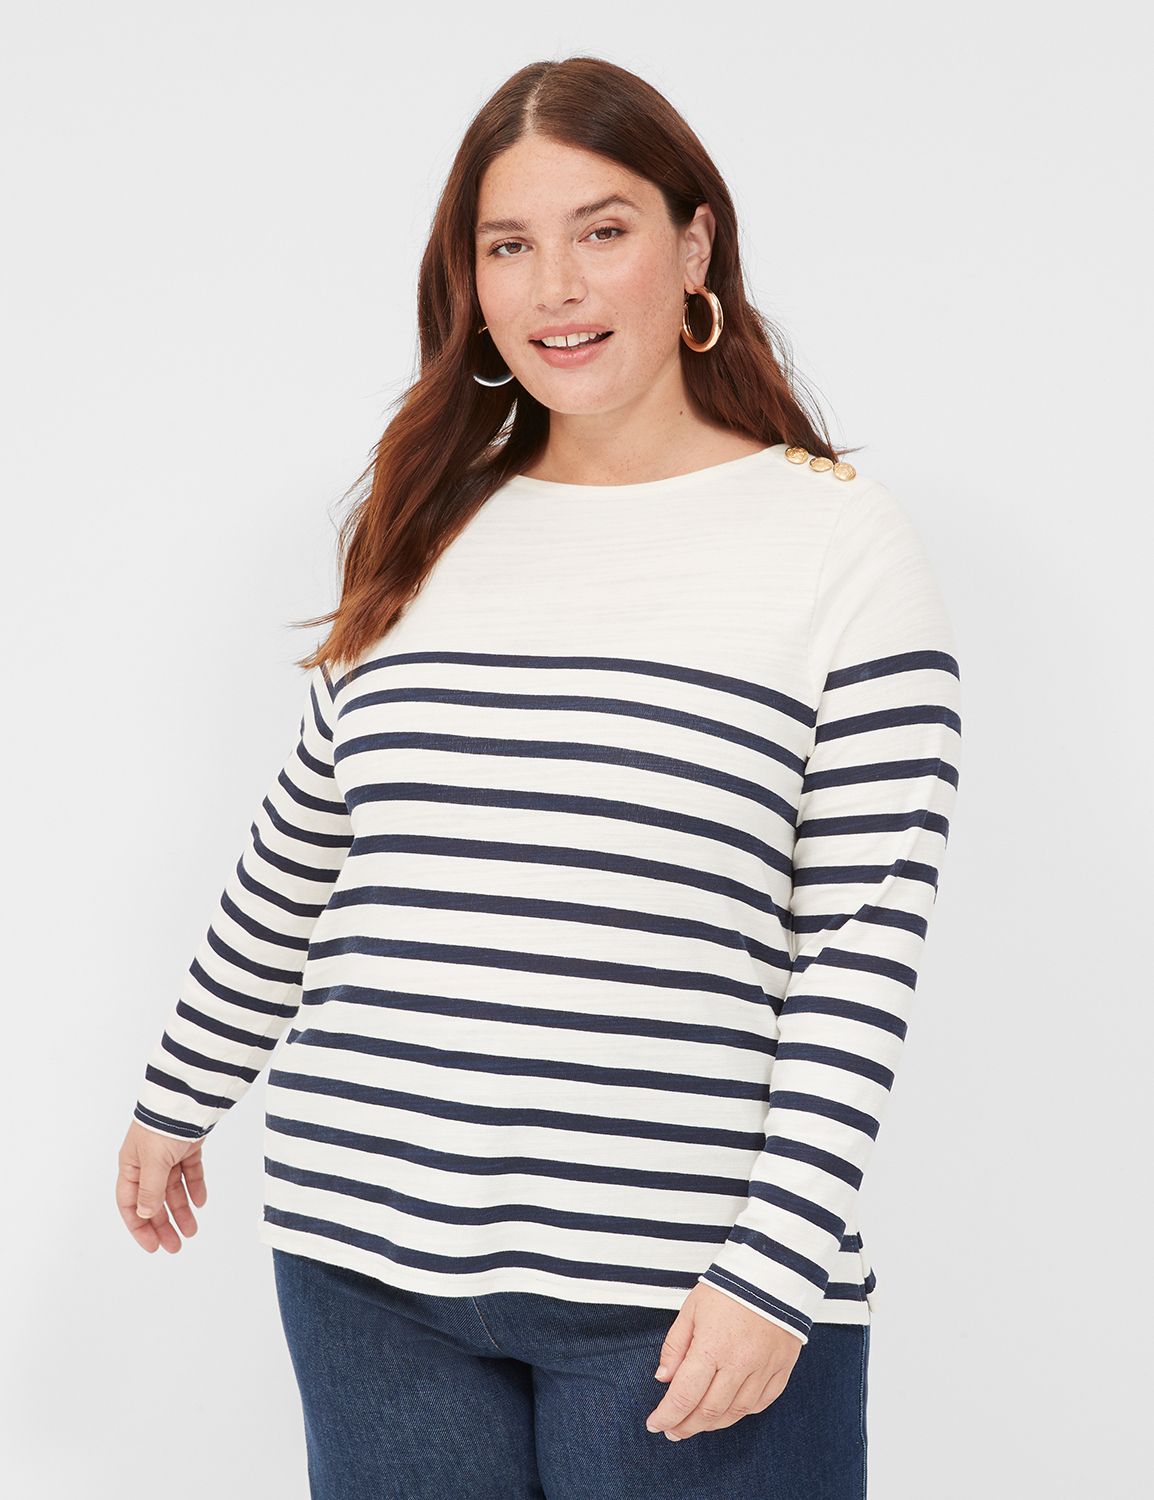 Clearance Plus Size Clothing - On Sale Today